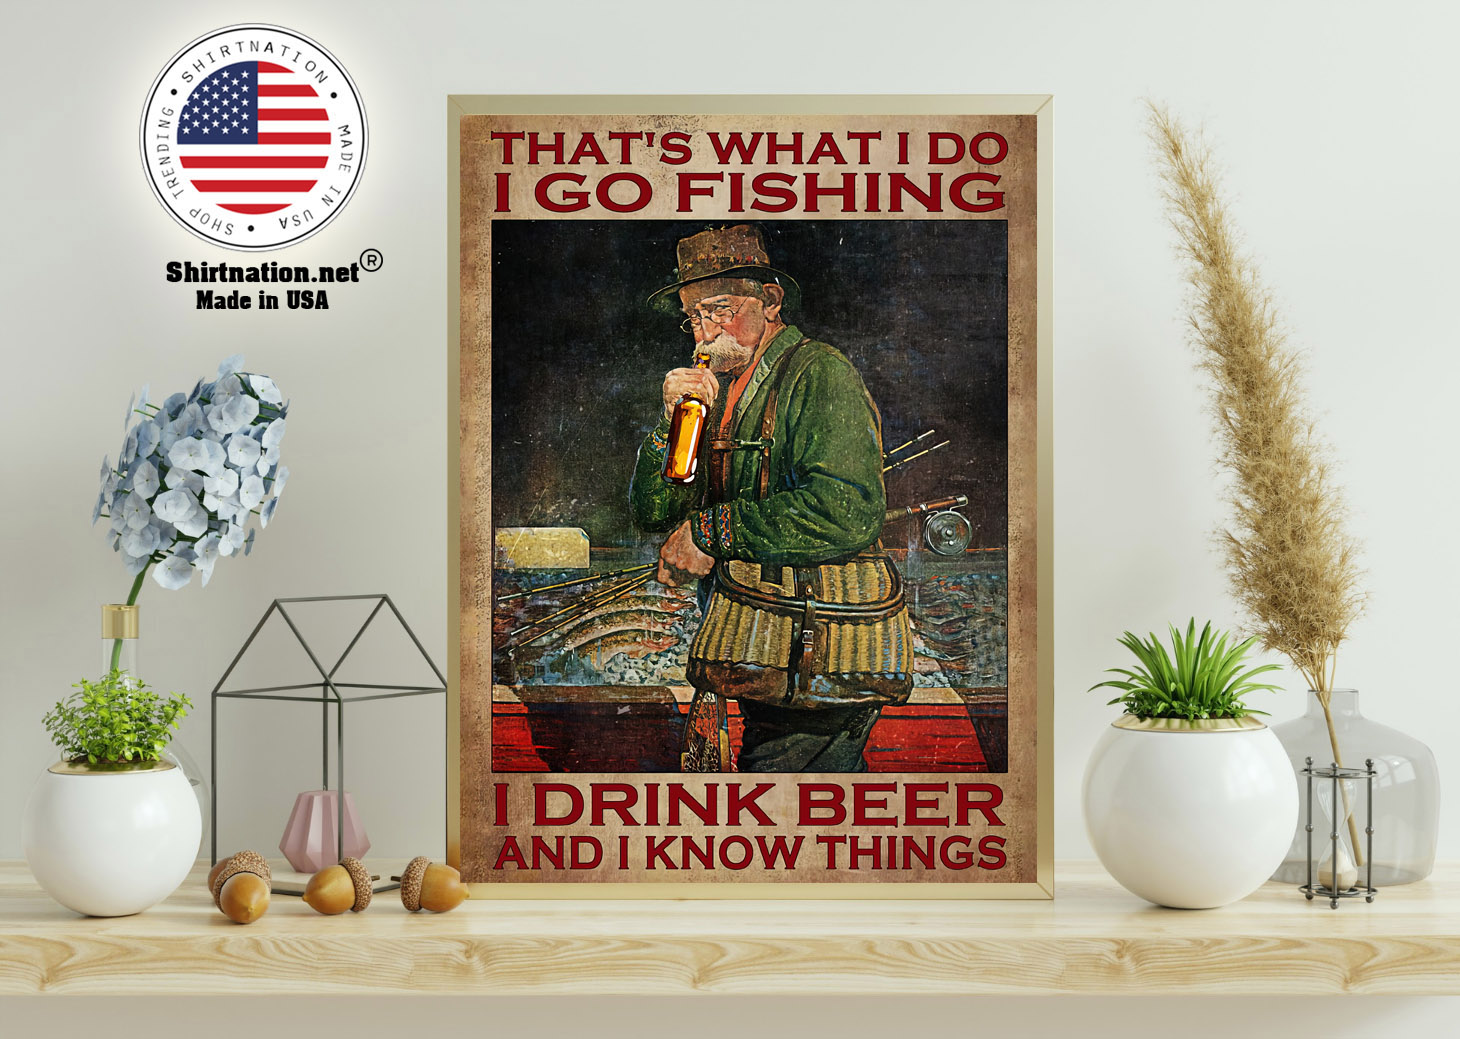 Old man Thats what I do I go fishing I drink beer and I know things poster 11